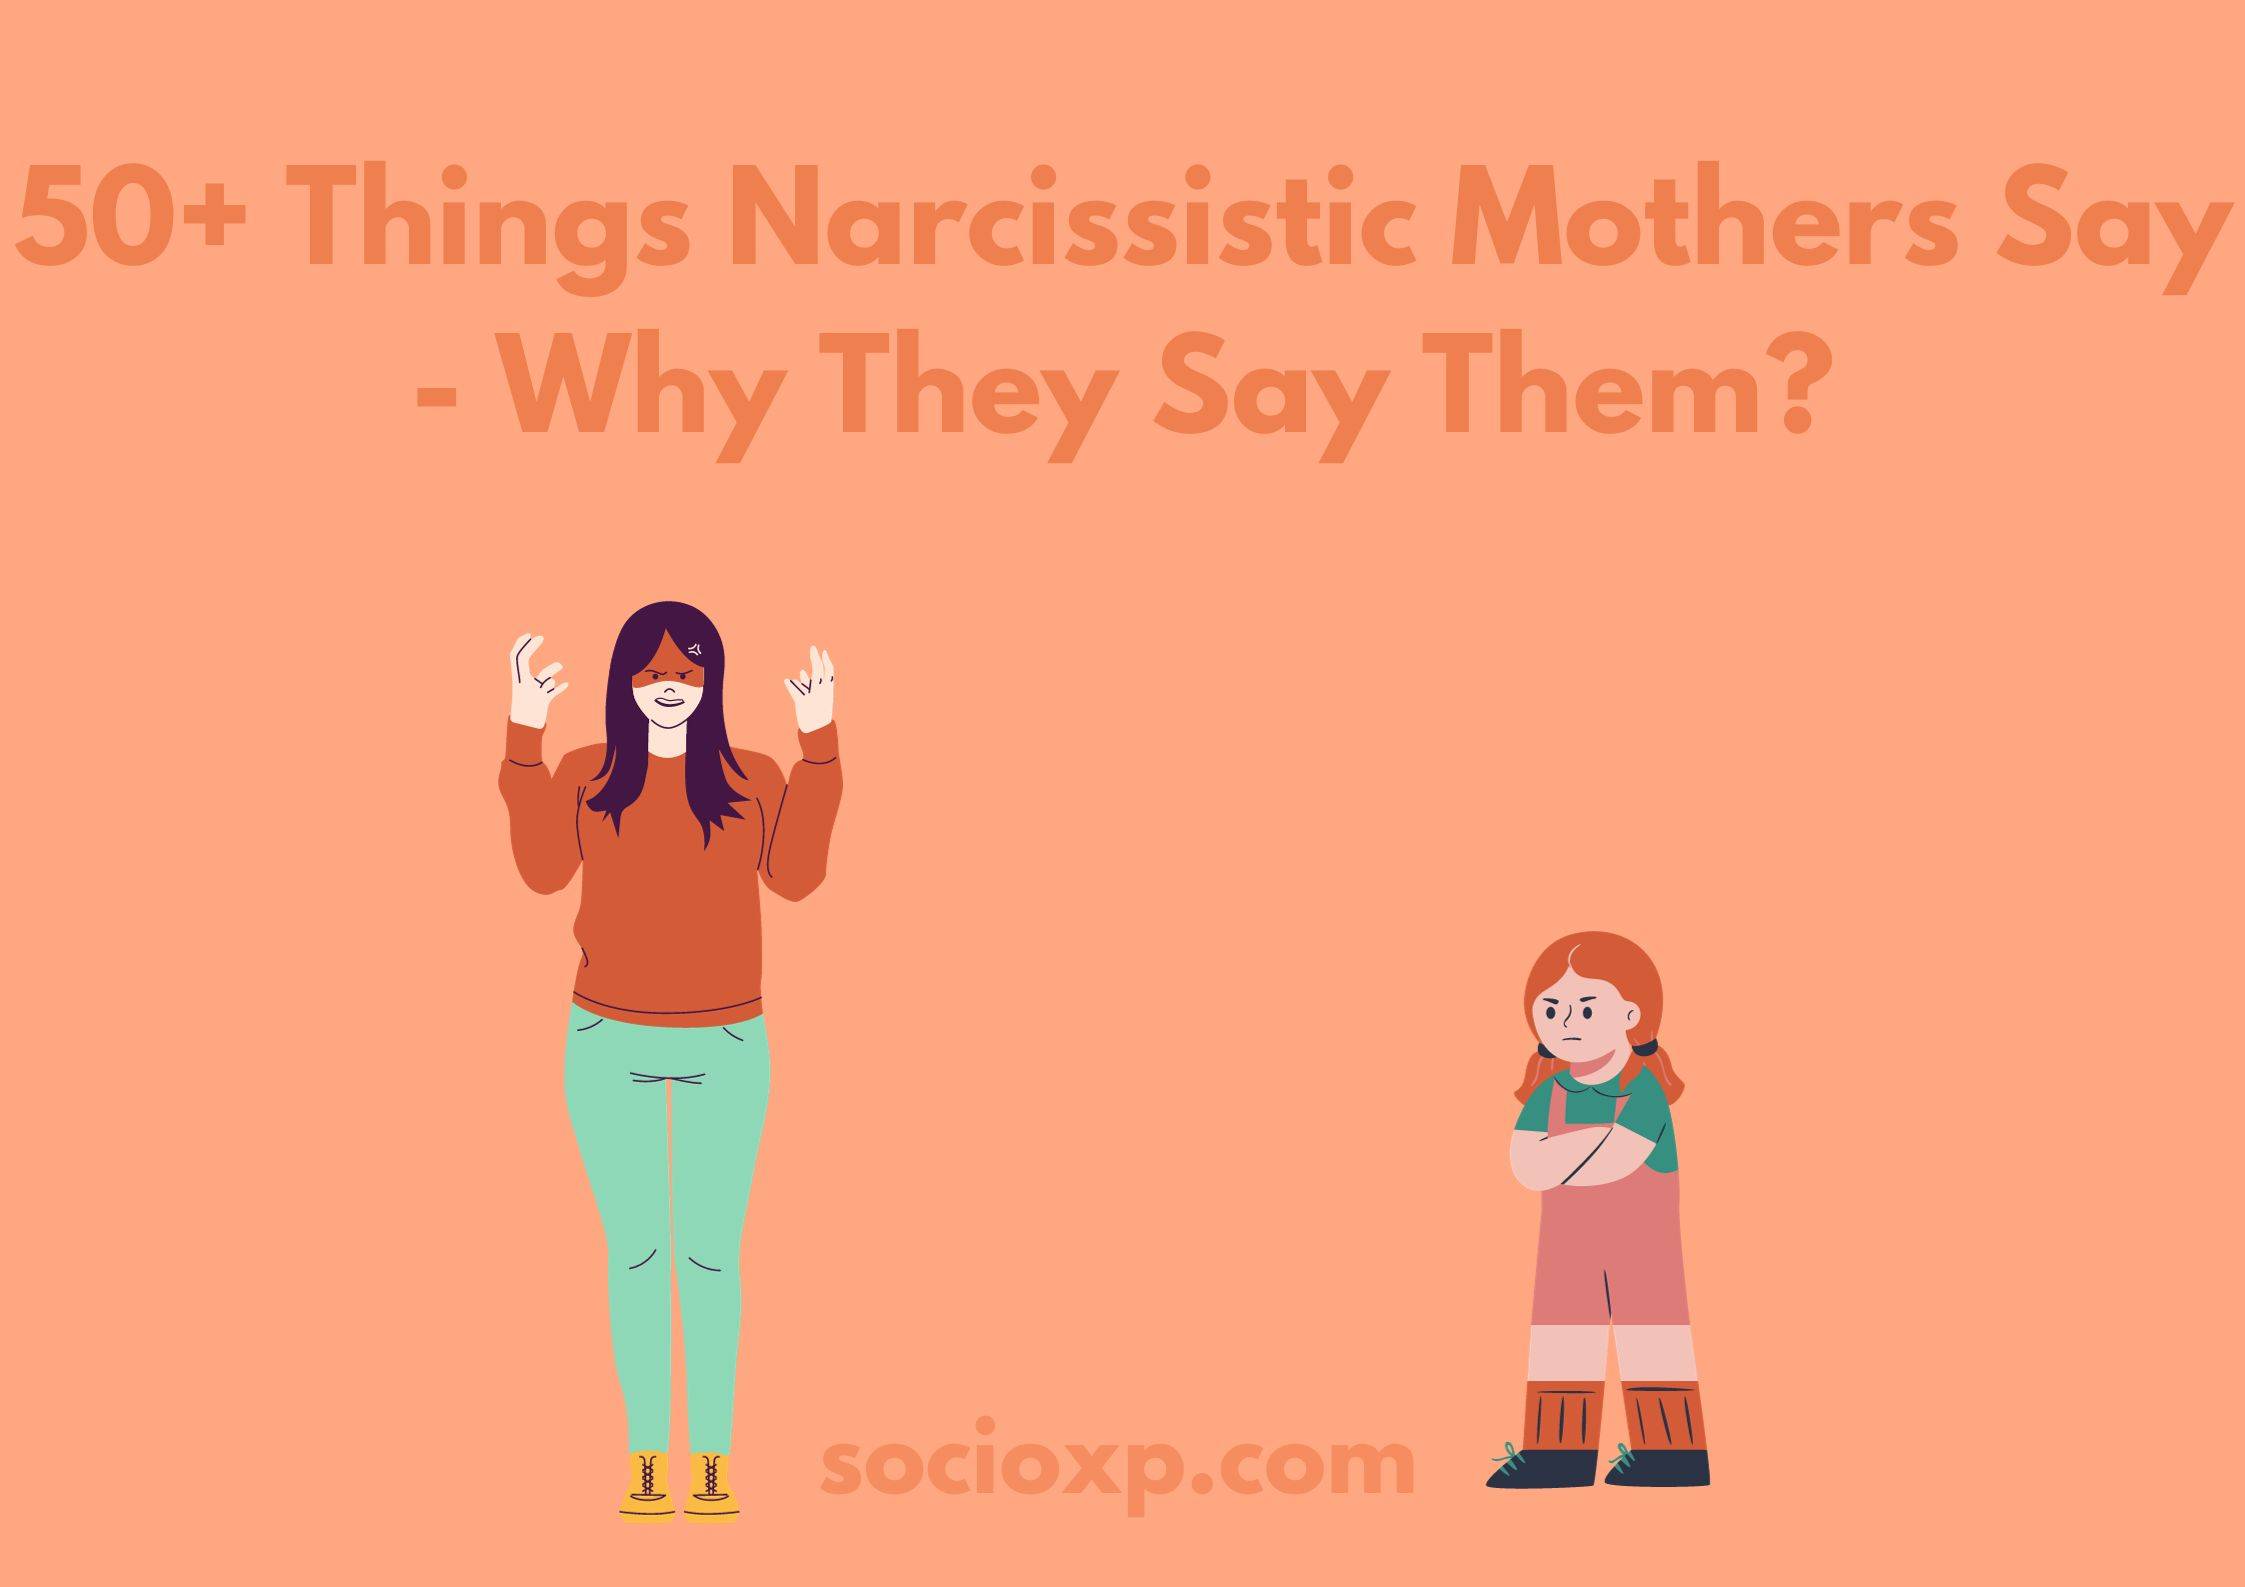 50+ Things Narcissistic Mothers Say - Why They Say Them?